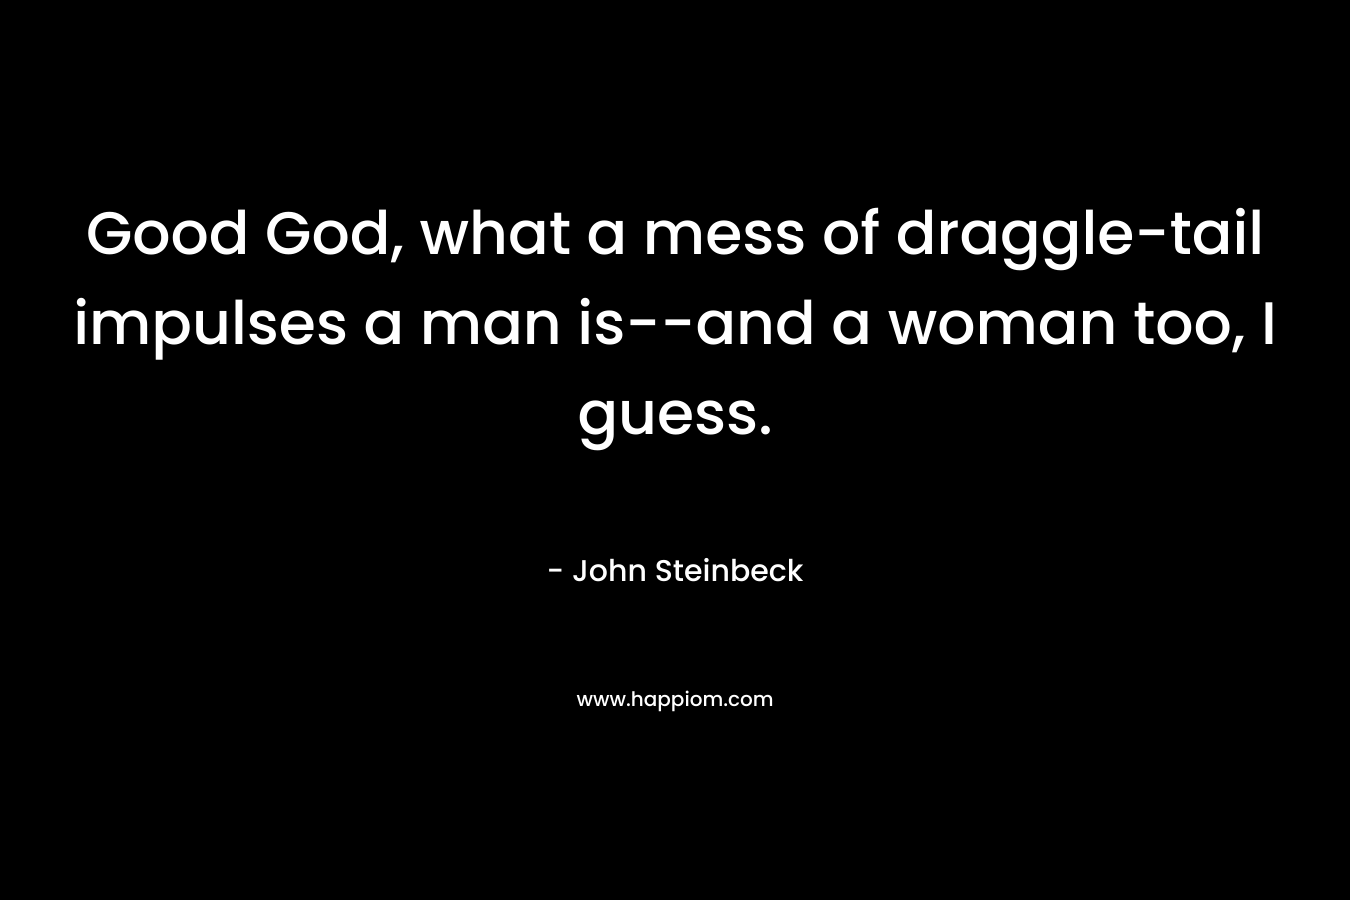 Good God, what a mess of draggle-tail impulses a man is–and a woman too, I guess. – John Steinbeck